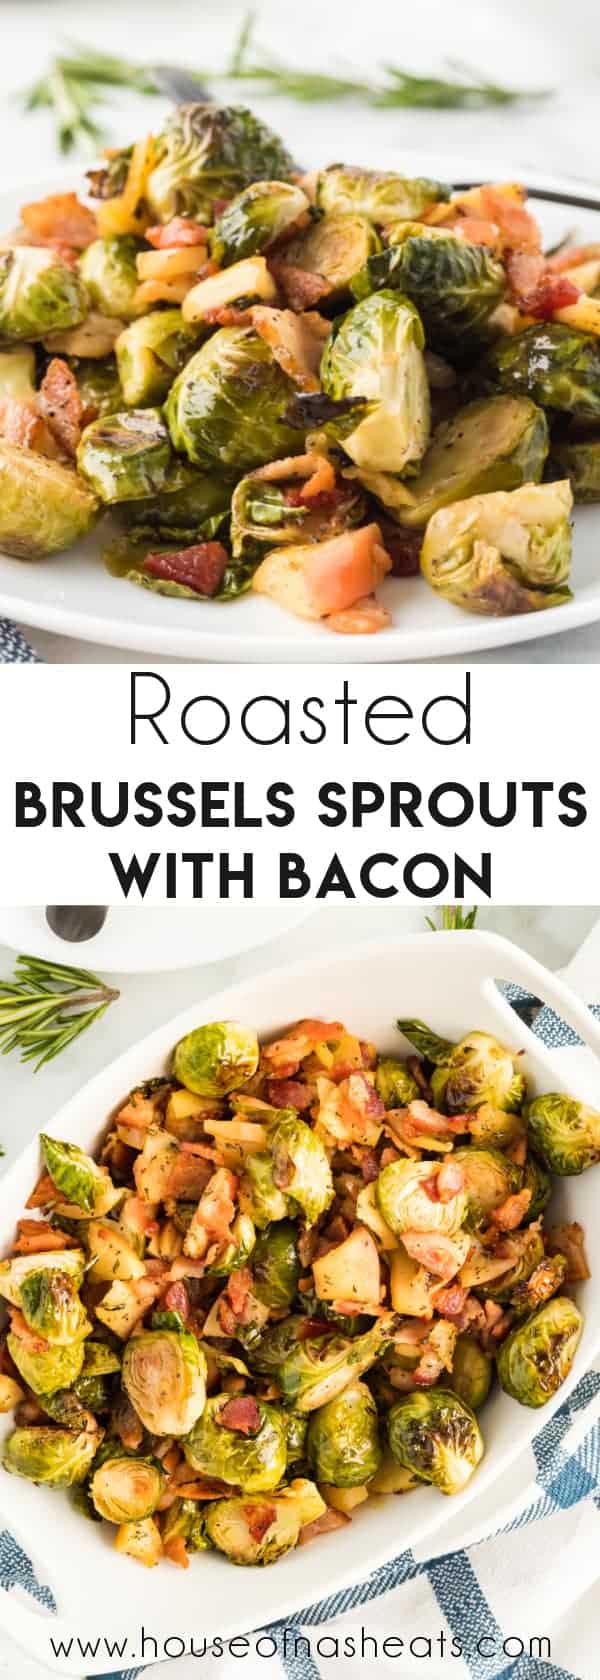 A collage of images of roasted brussels sprouts with text overlay.